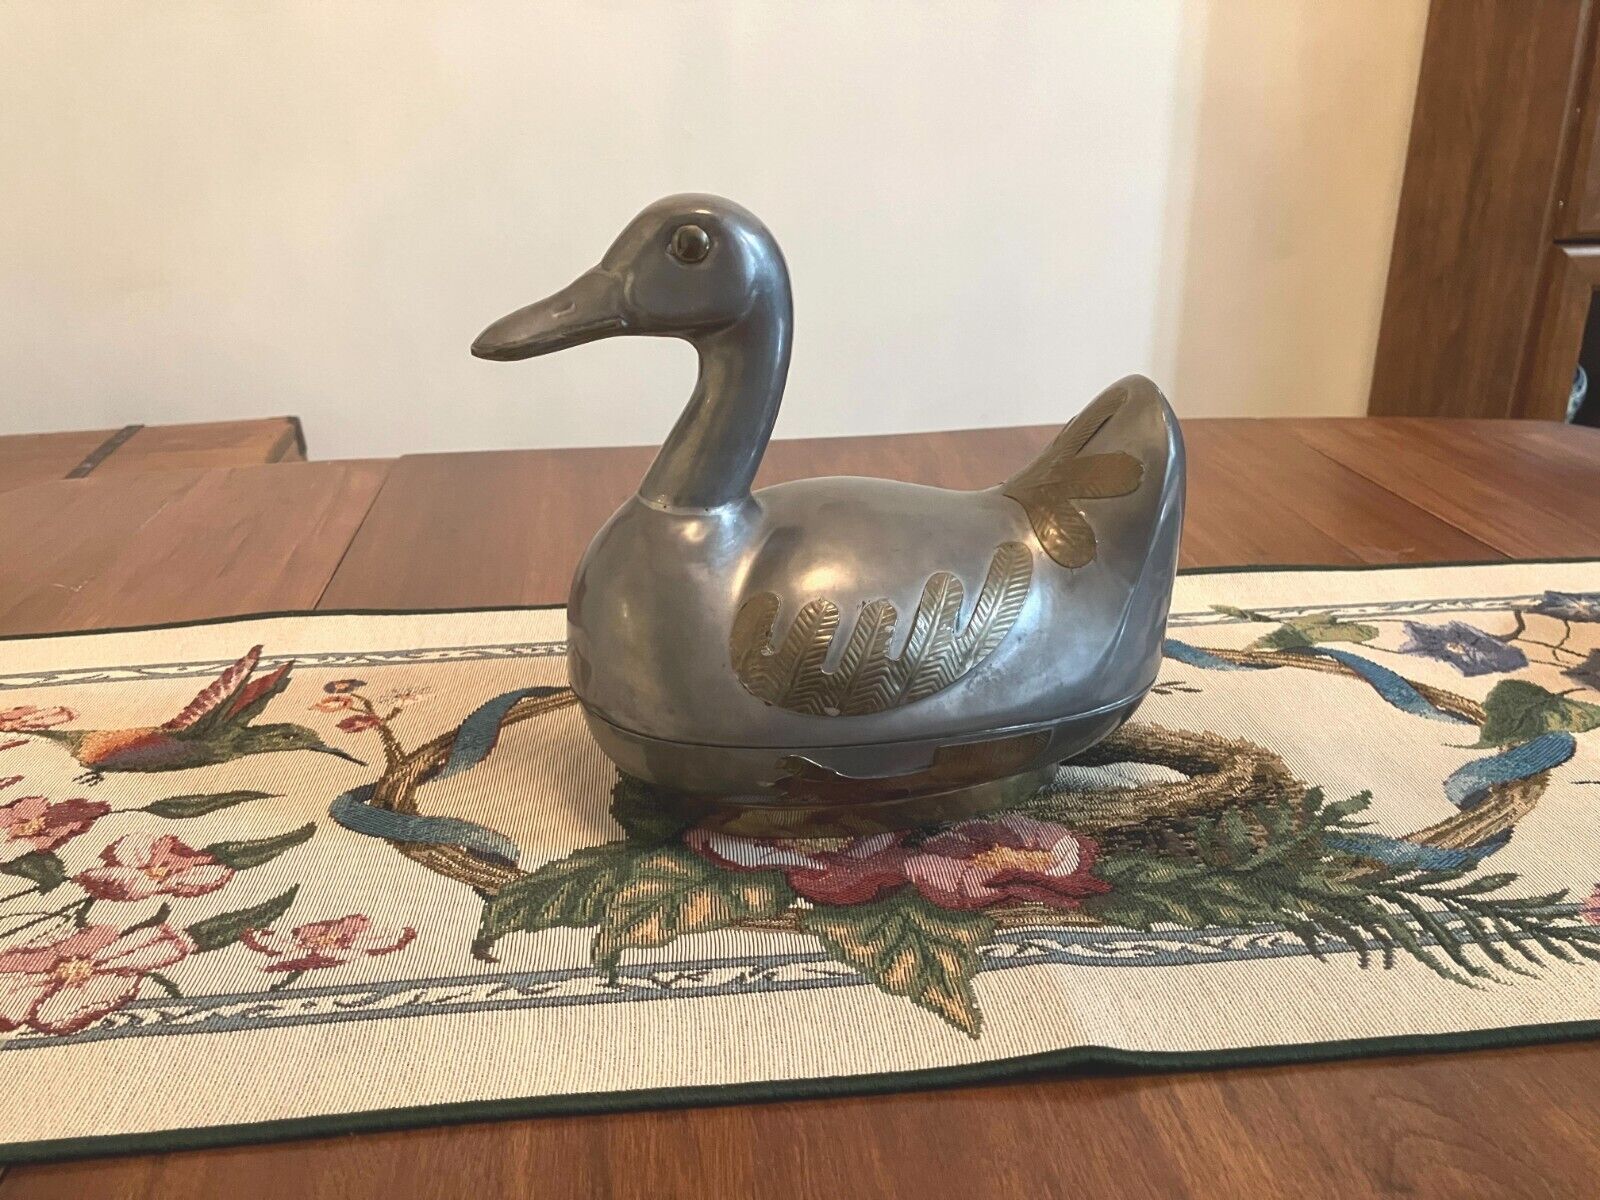 PEWTER DUCK - MING DYNESTY DESIGN - OPENS TO HOLD YOUR TREASURES